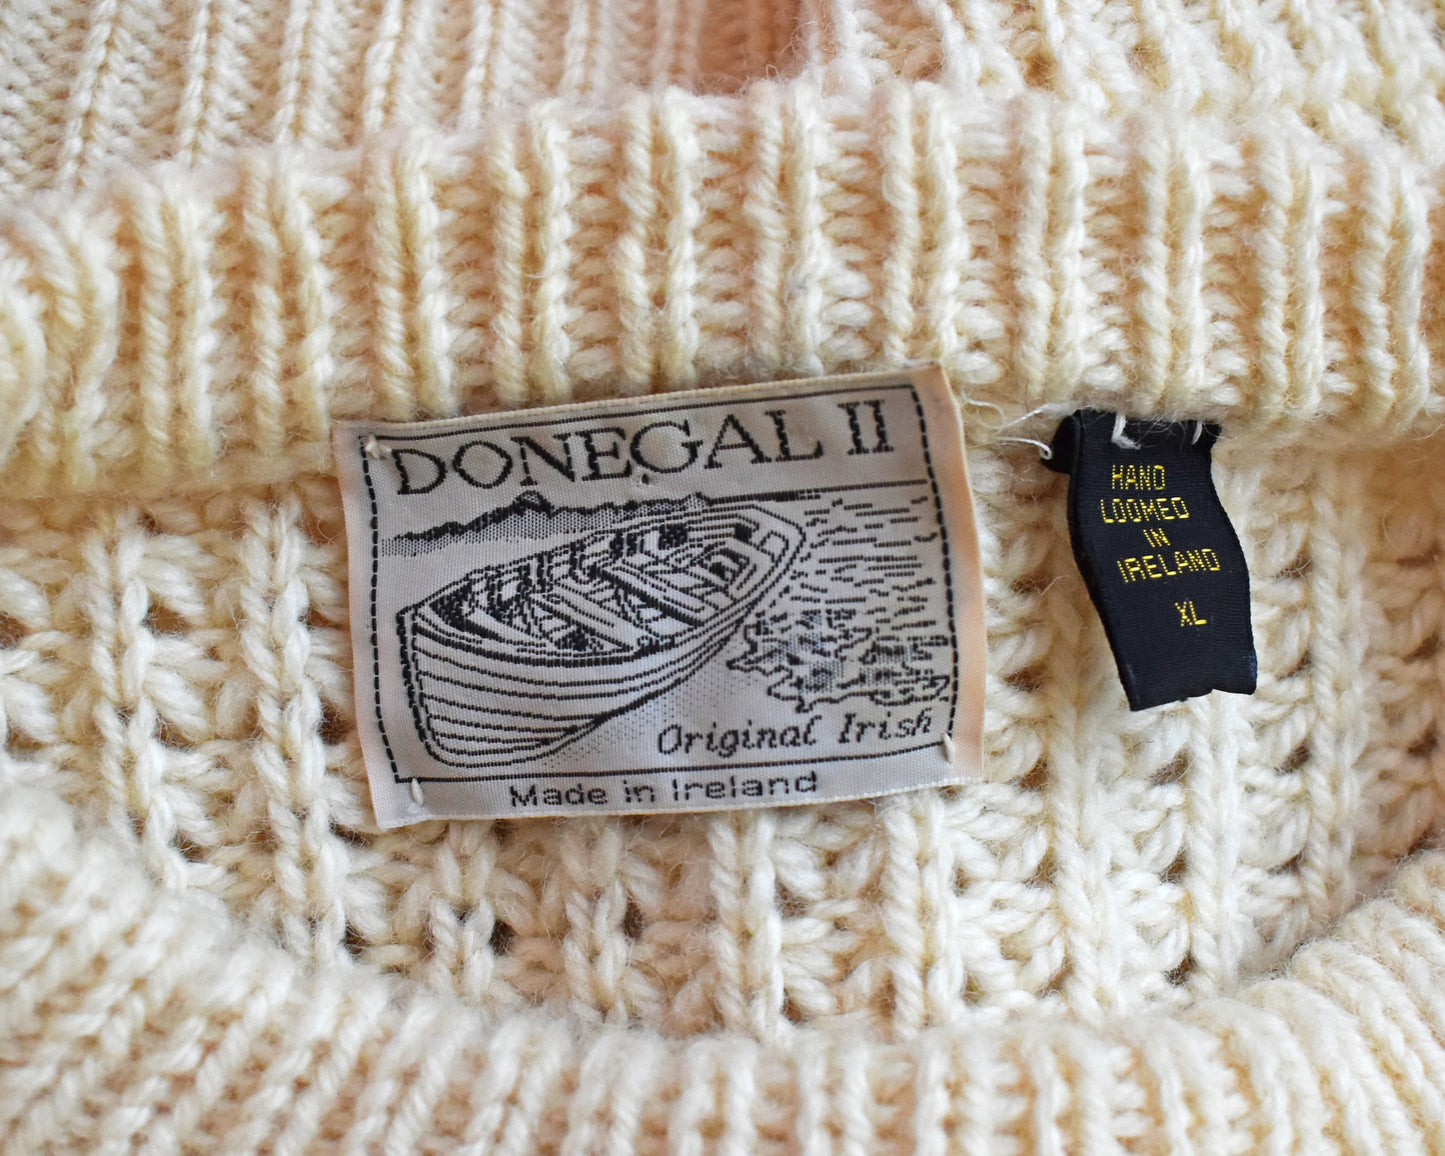 close up of the tag which says Donegal II